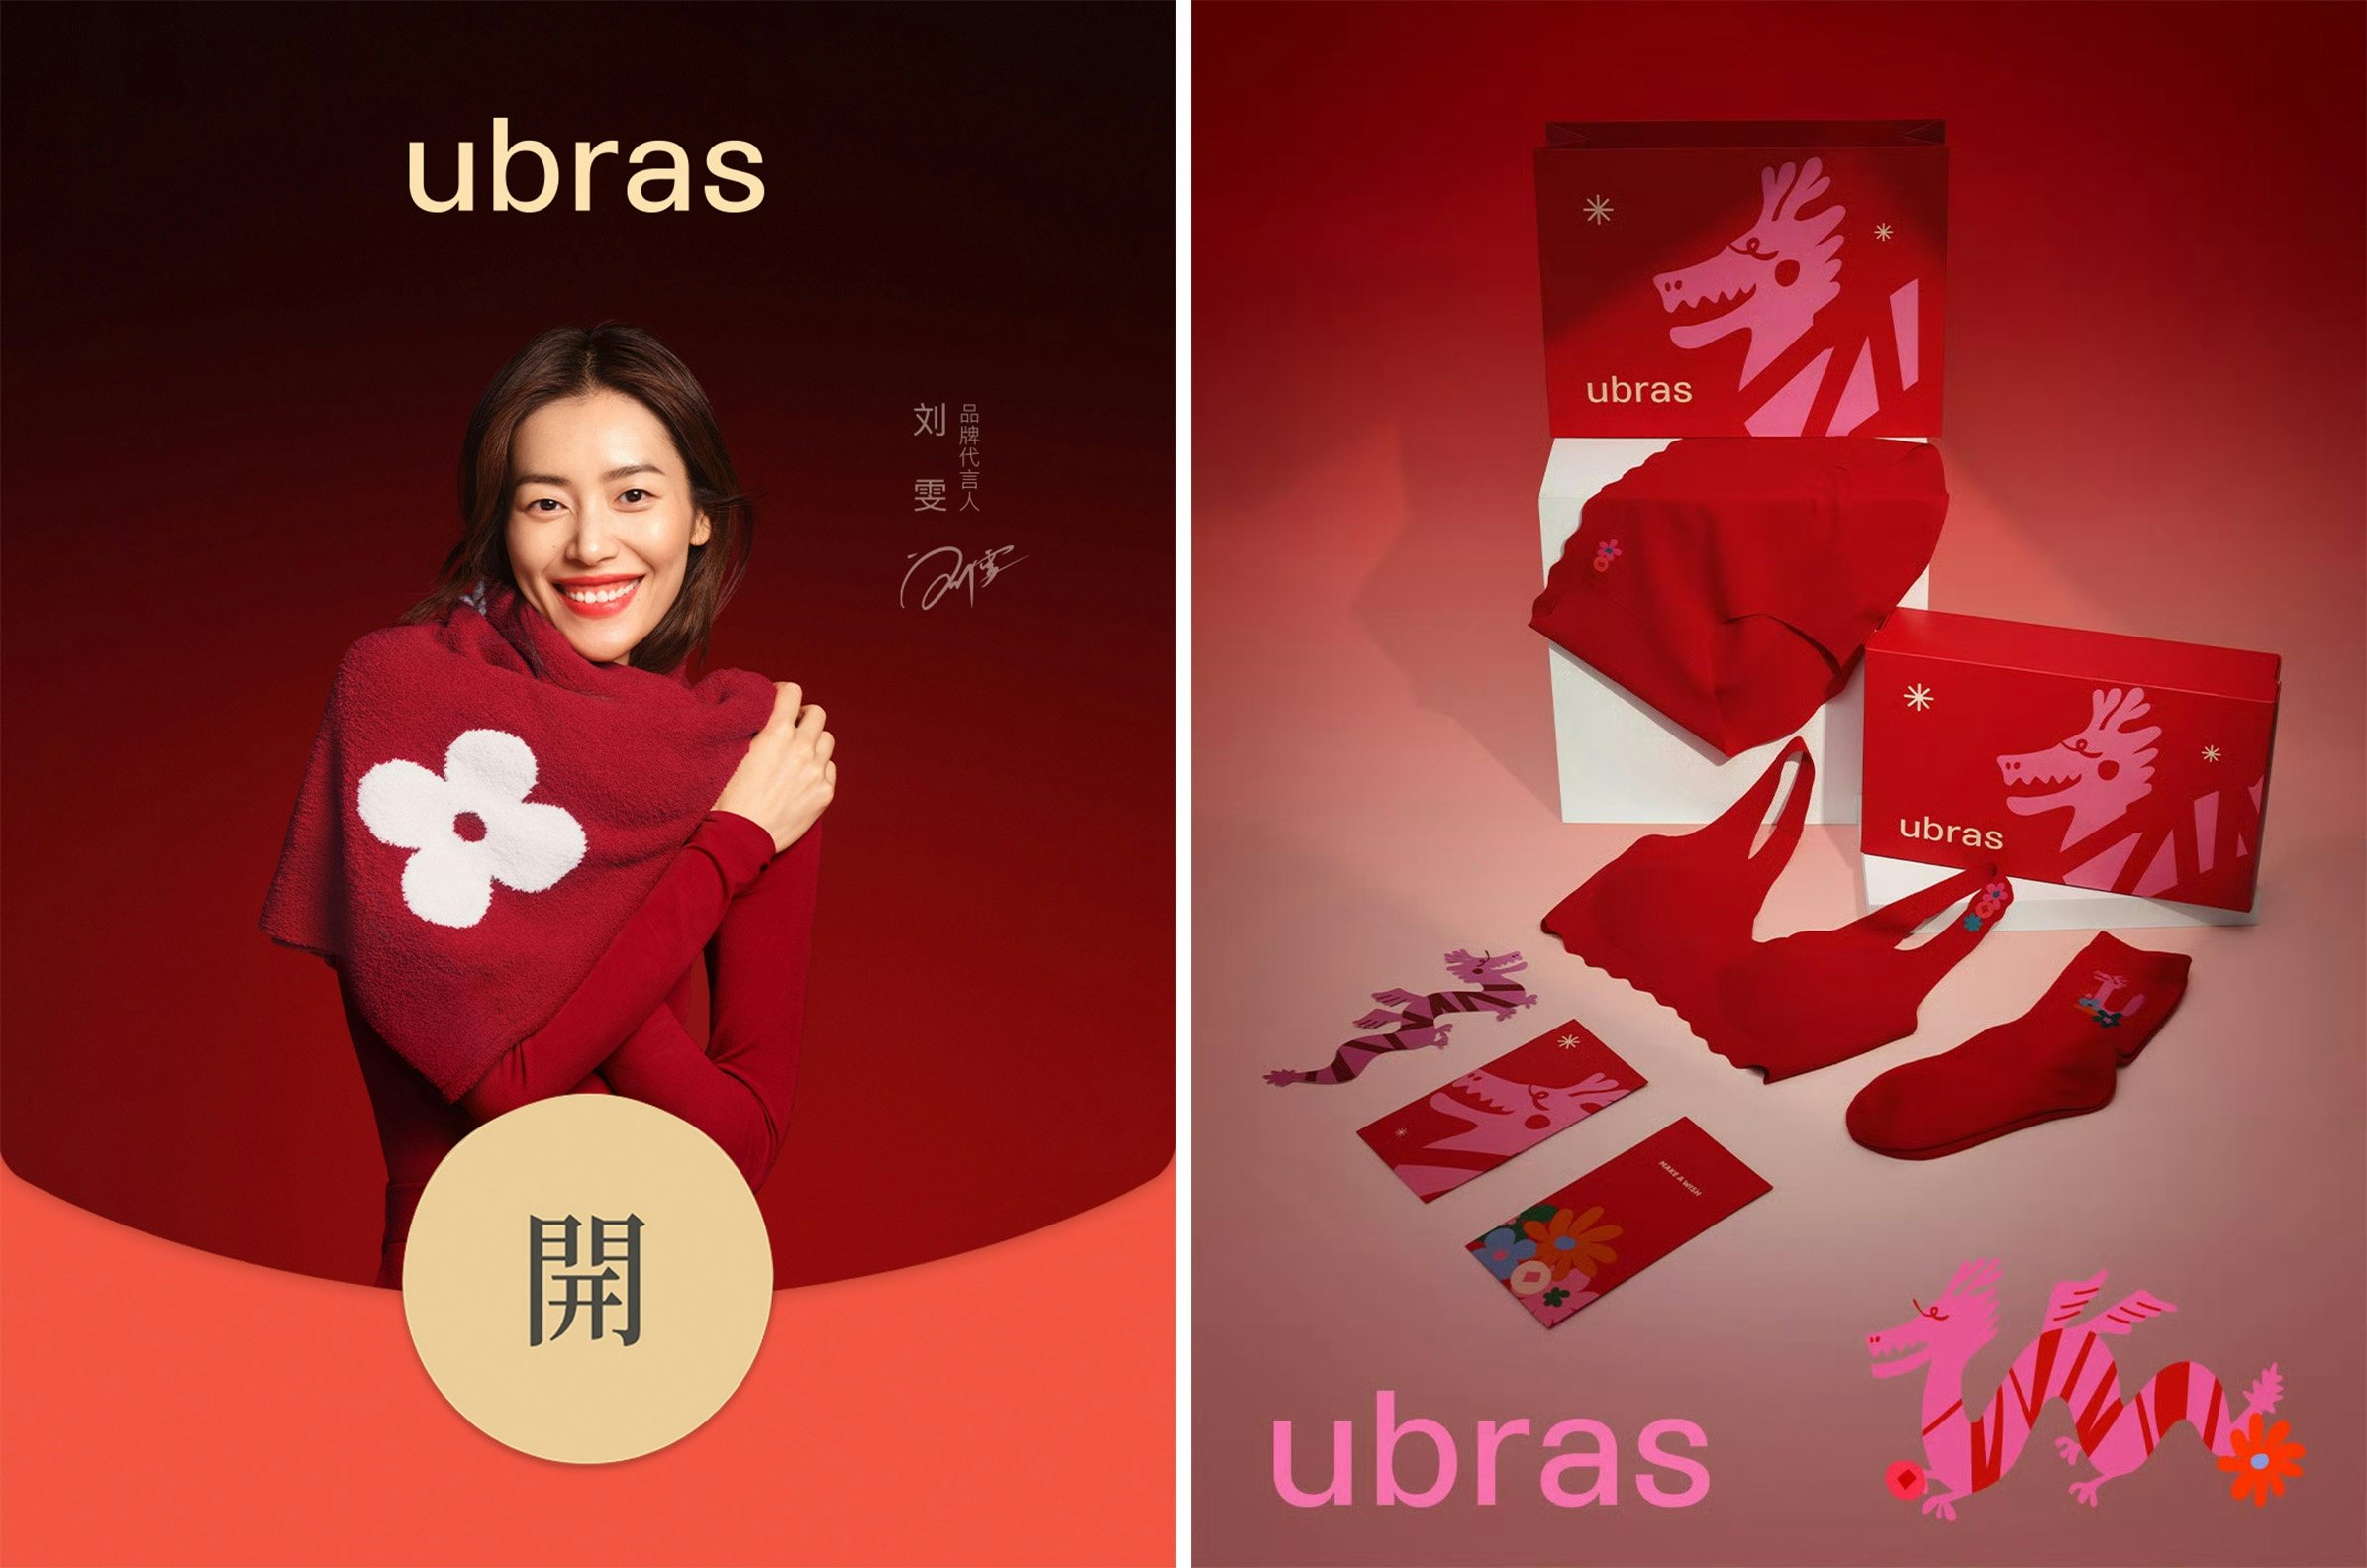 Supermodel Liu Wen features on the cover of Ubras’ limited edition Chinese New Year envelope. Photo: Ubras